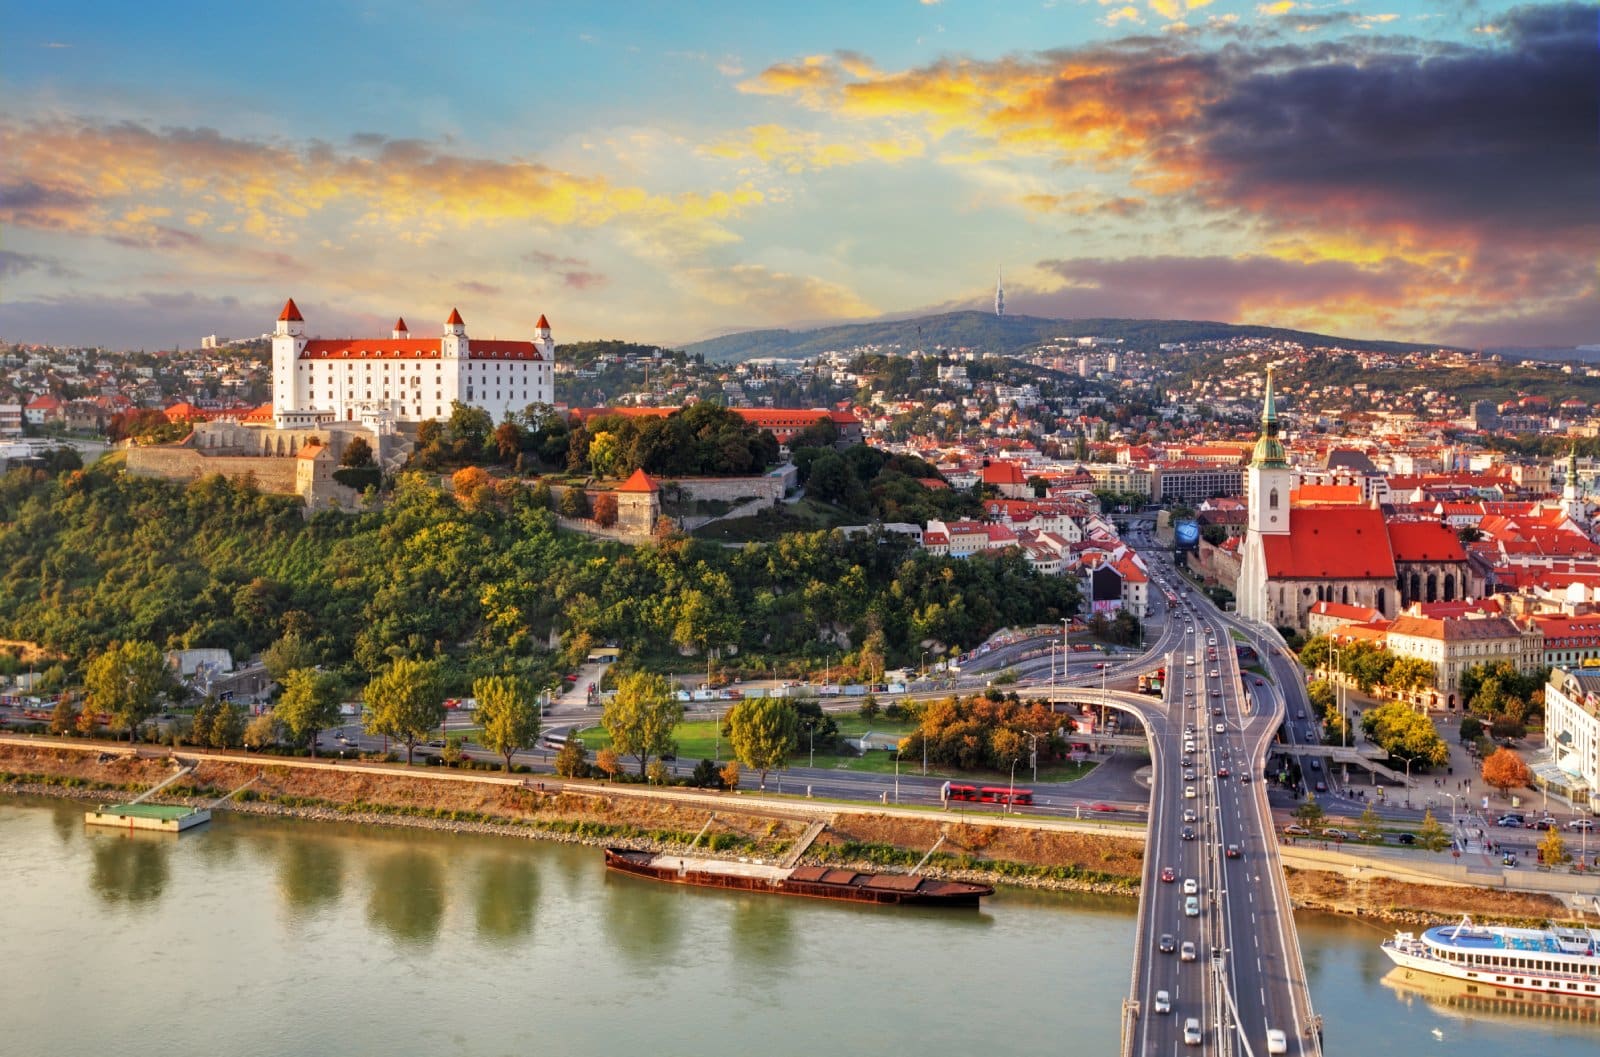 <p class="wp-caption-text">Image Credit: Shutterstock / TTstudio</p>  <p>Bratislava combines affordability with charm, offering cheap public transport, free city tours, and reasonably priced Slovak cuisine.</p>